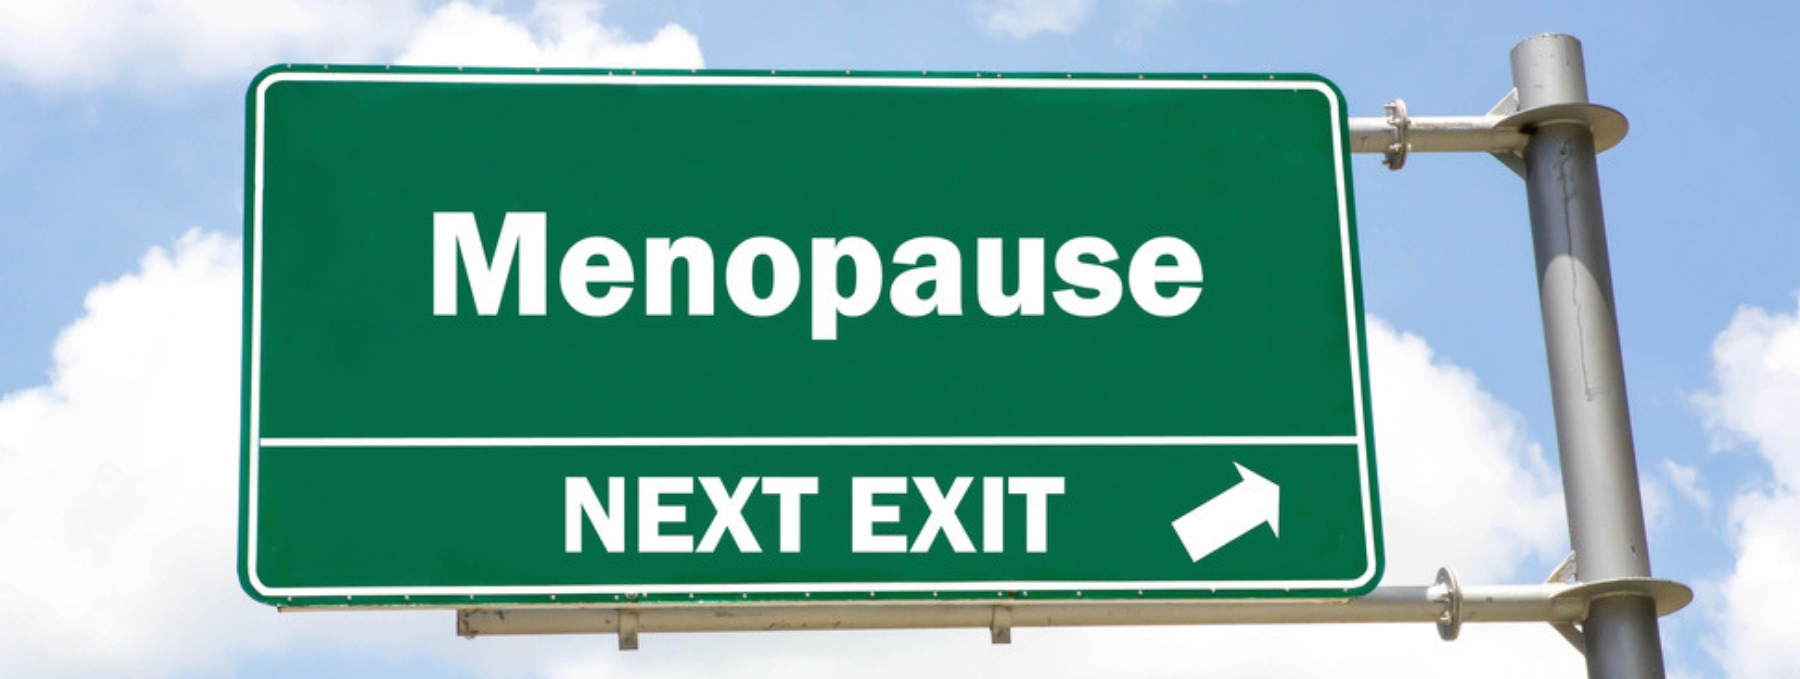 Certain Lifestyle Factors Found to Increase Risk of Menopause Hot Flashes